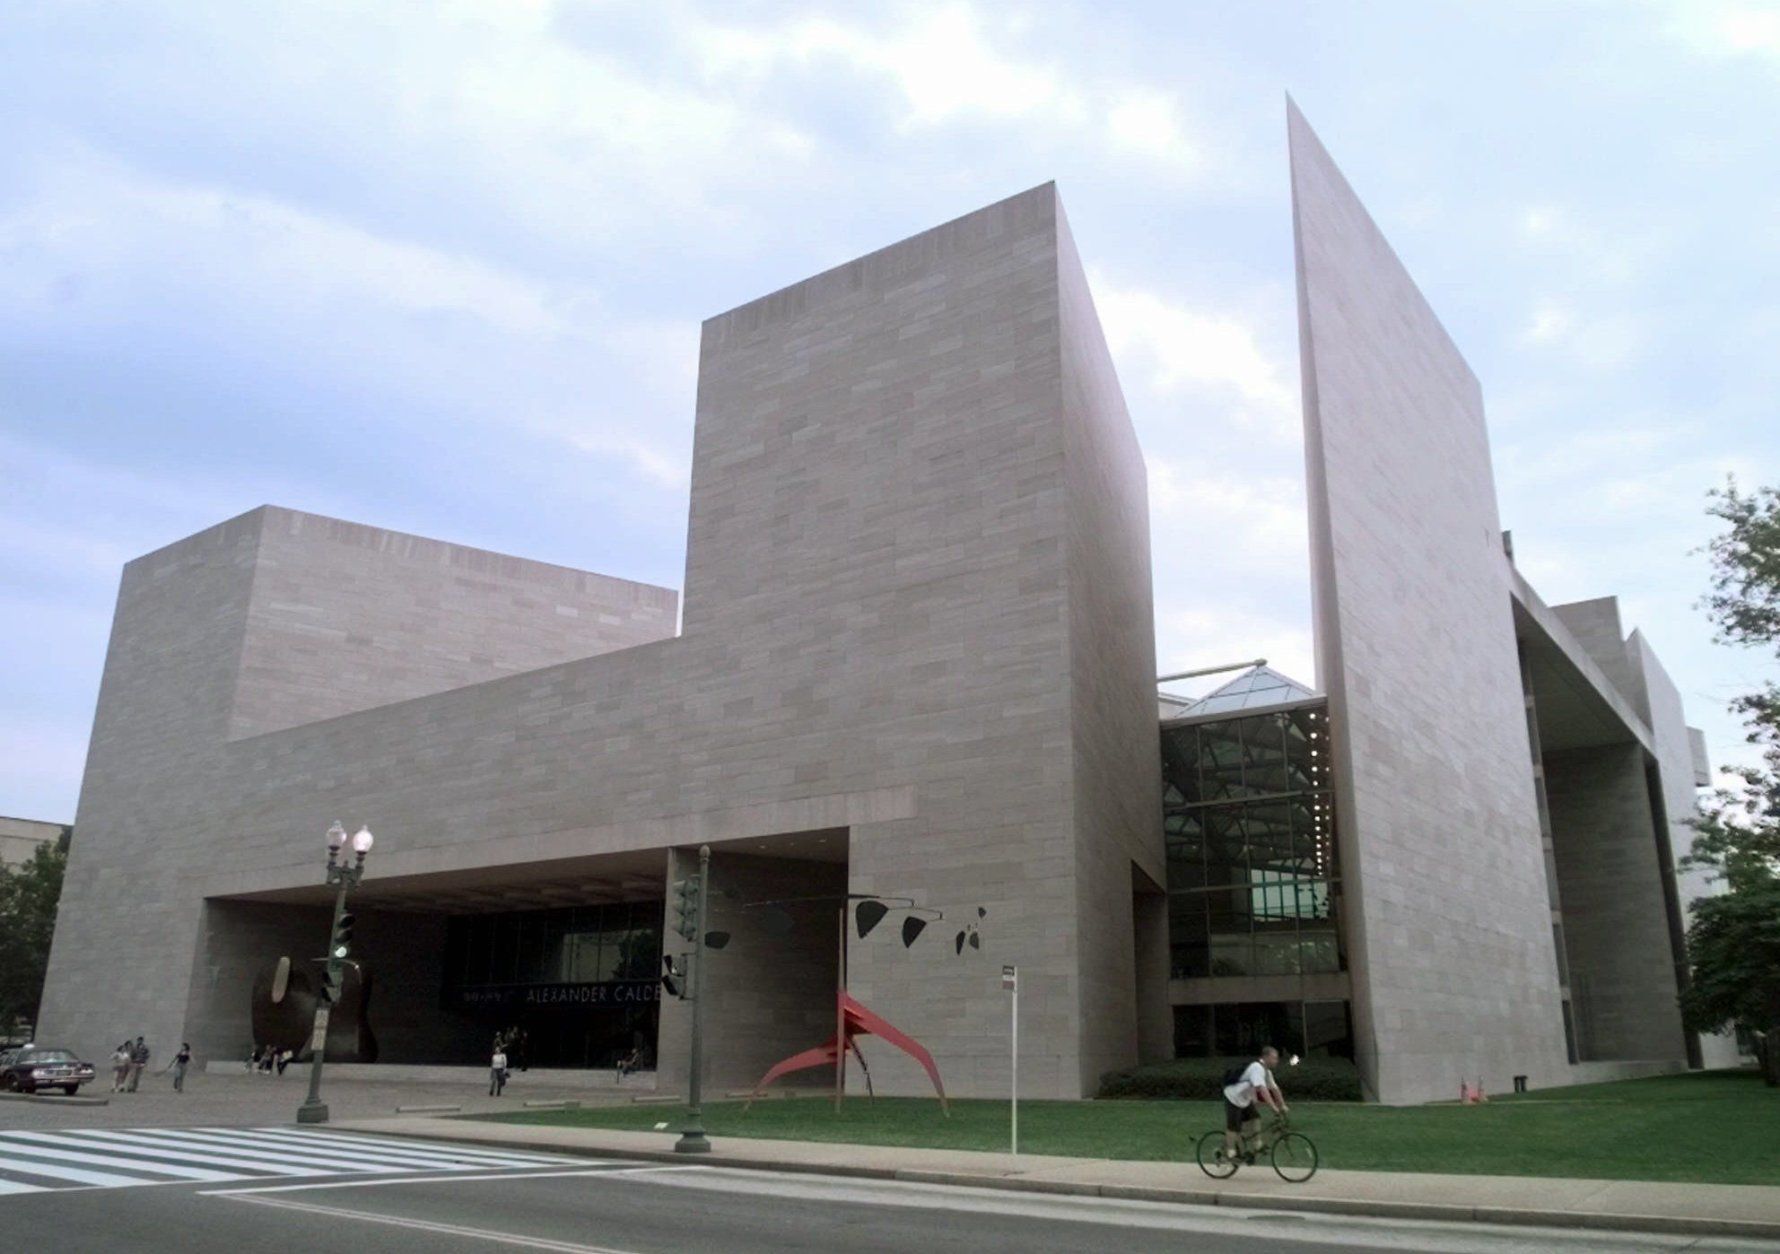 The National Gallery of Art East Building in Washington is seen Sunday, May 3, 1998. Planners are predicting the opening of the Ronald Reagan Building and International Trade Center, which was dedicated Tuesday, May 5, 1998, will be part of a new look for the nation's capital in the new millennium, featuring daring design and a revived inner city. (AP Photo/Wilfredo Lee)